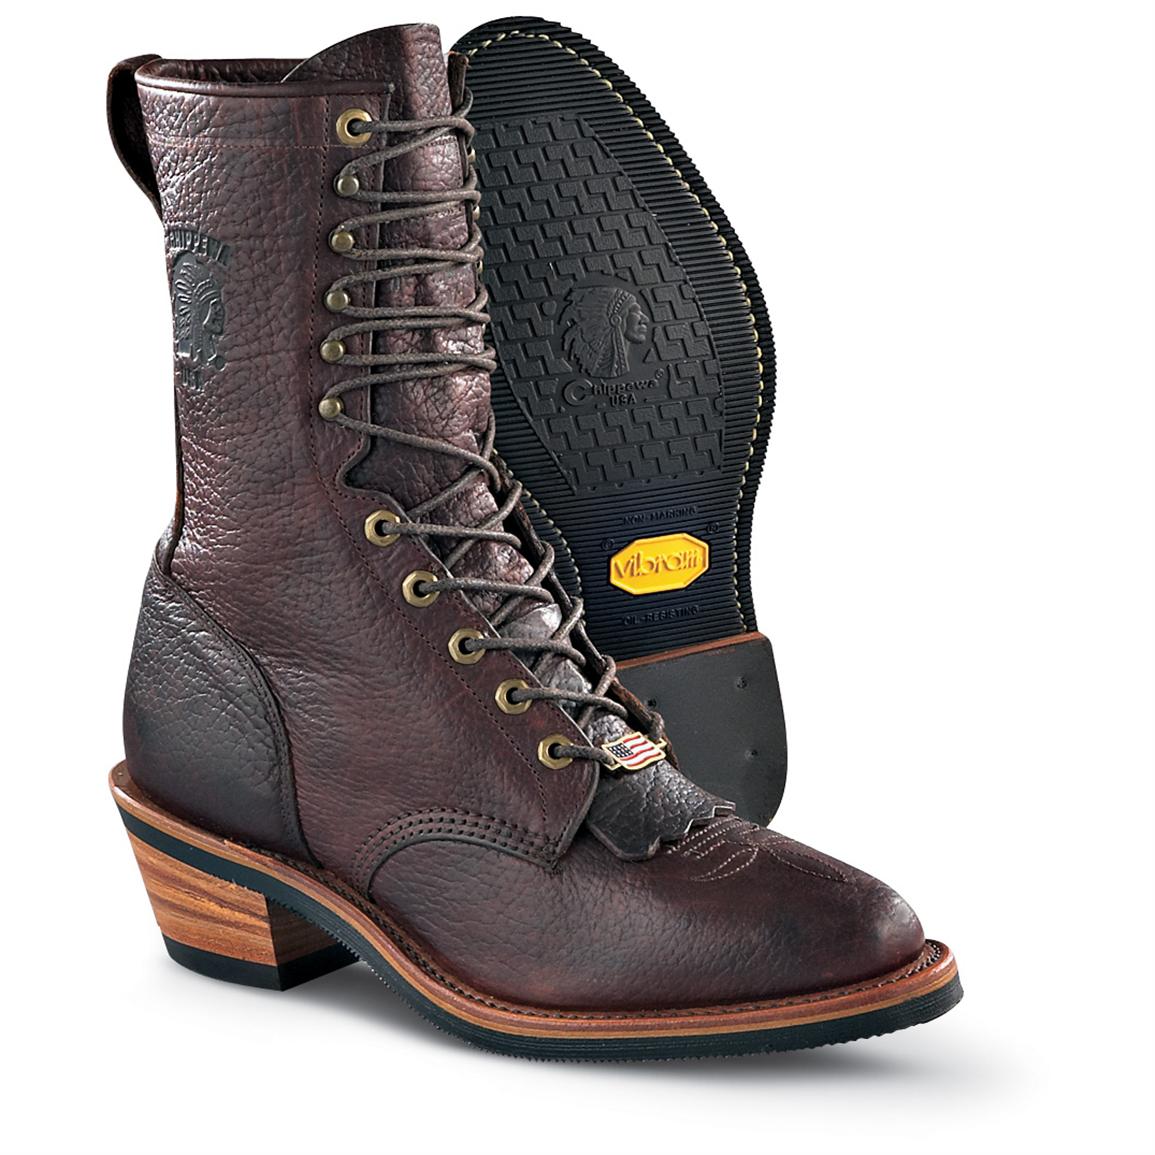 Men's Chippewa® Bison Packer Boots 